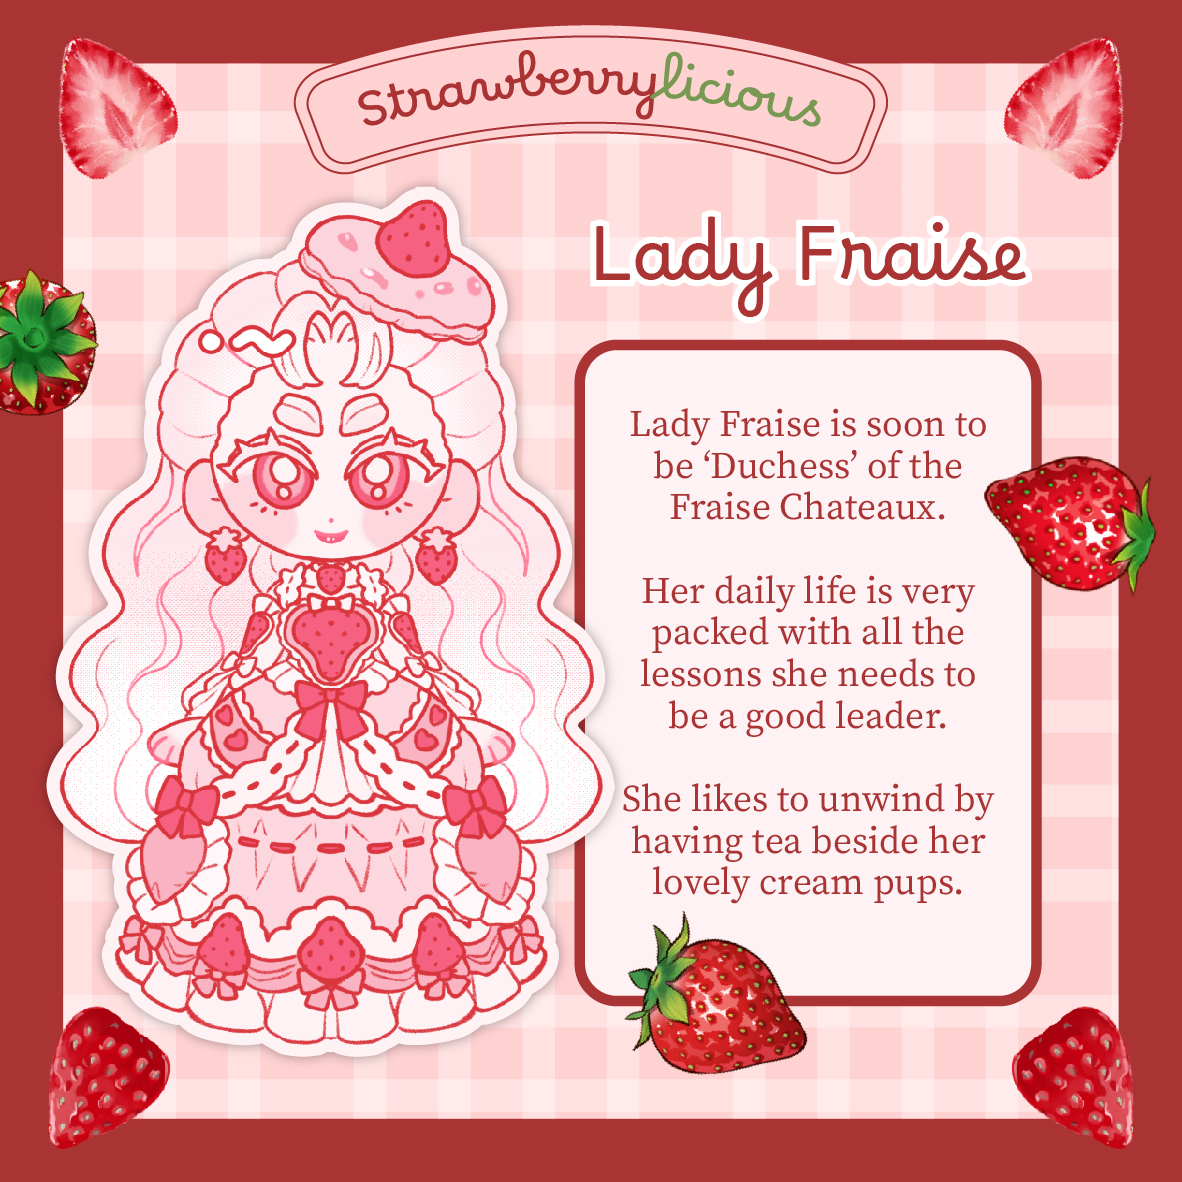 last profile! today i will introduce Lady Fraise 🍓✨